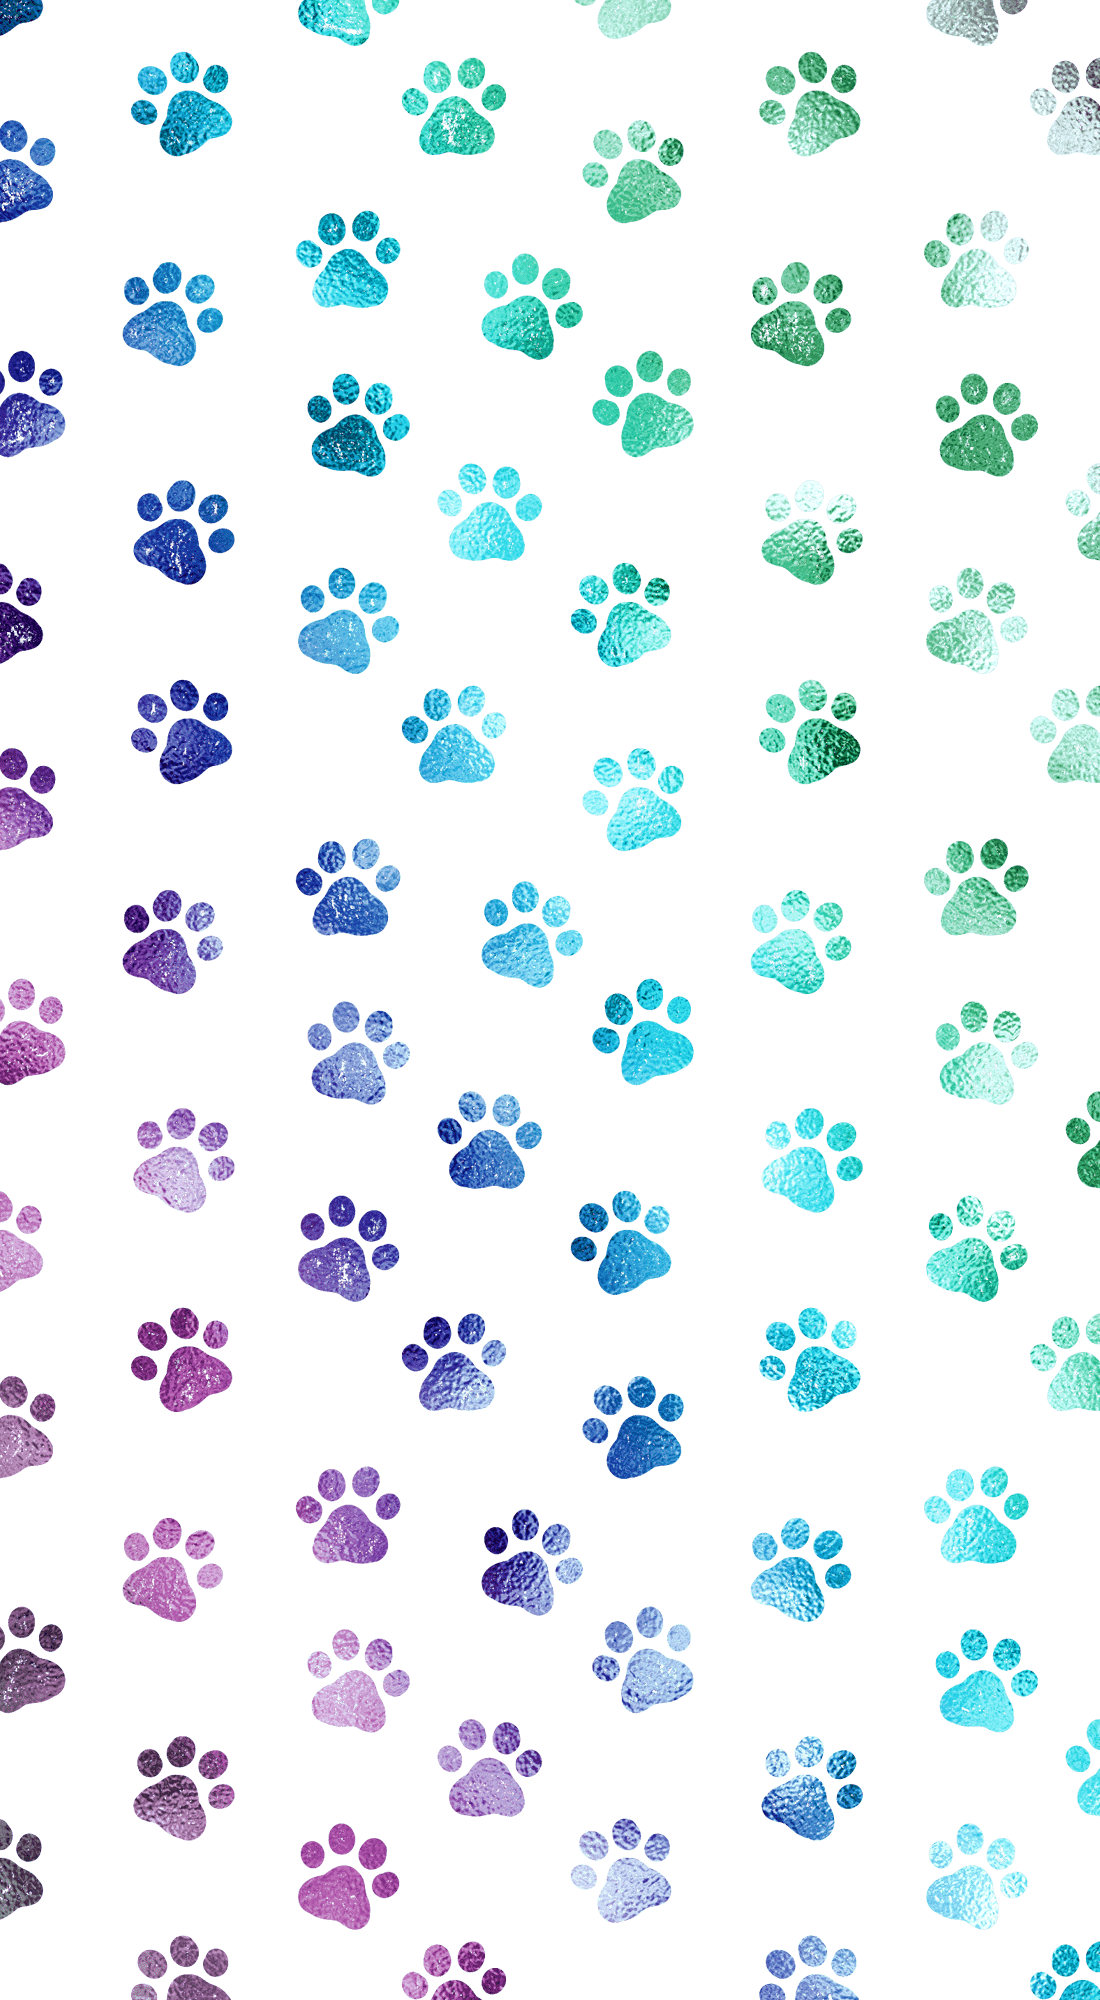 Dog Paw Wallpapers - Top Free Dog Paw Backgrounds - WallpaperAccess